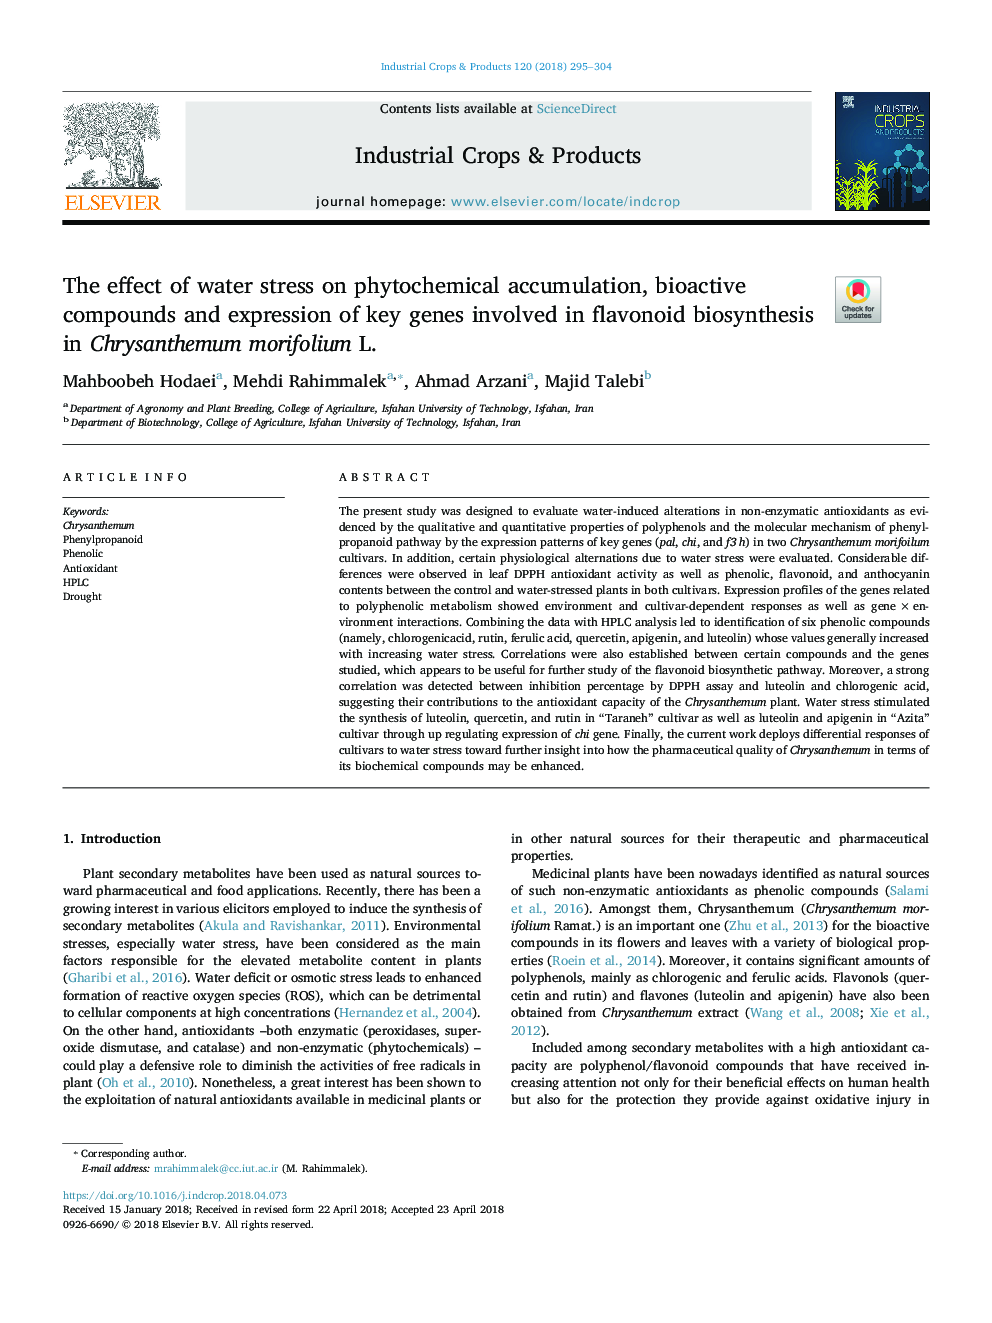 The effect of water stress on phytochemical accumulation, bioactive compounds and expression of key genes involved in flavonoid biosynthesis in Chrysanthemum morifolium L.